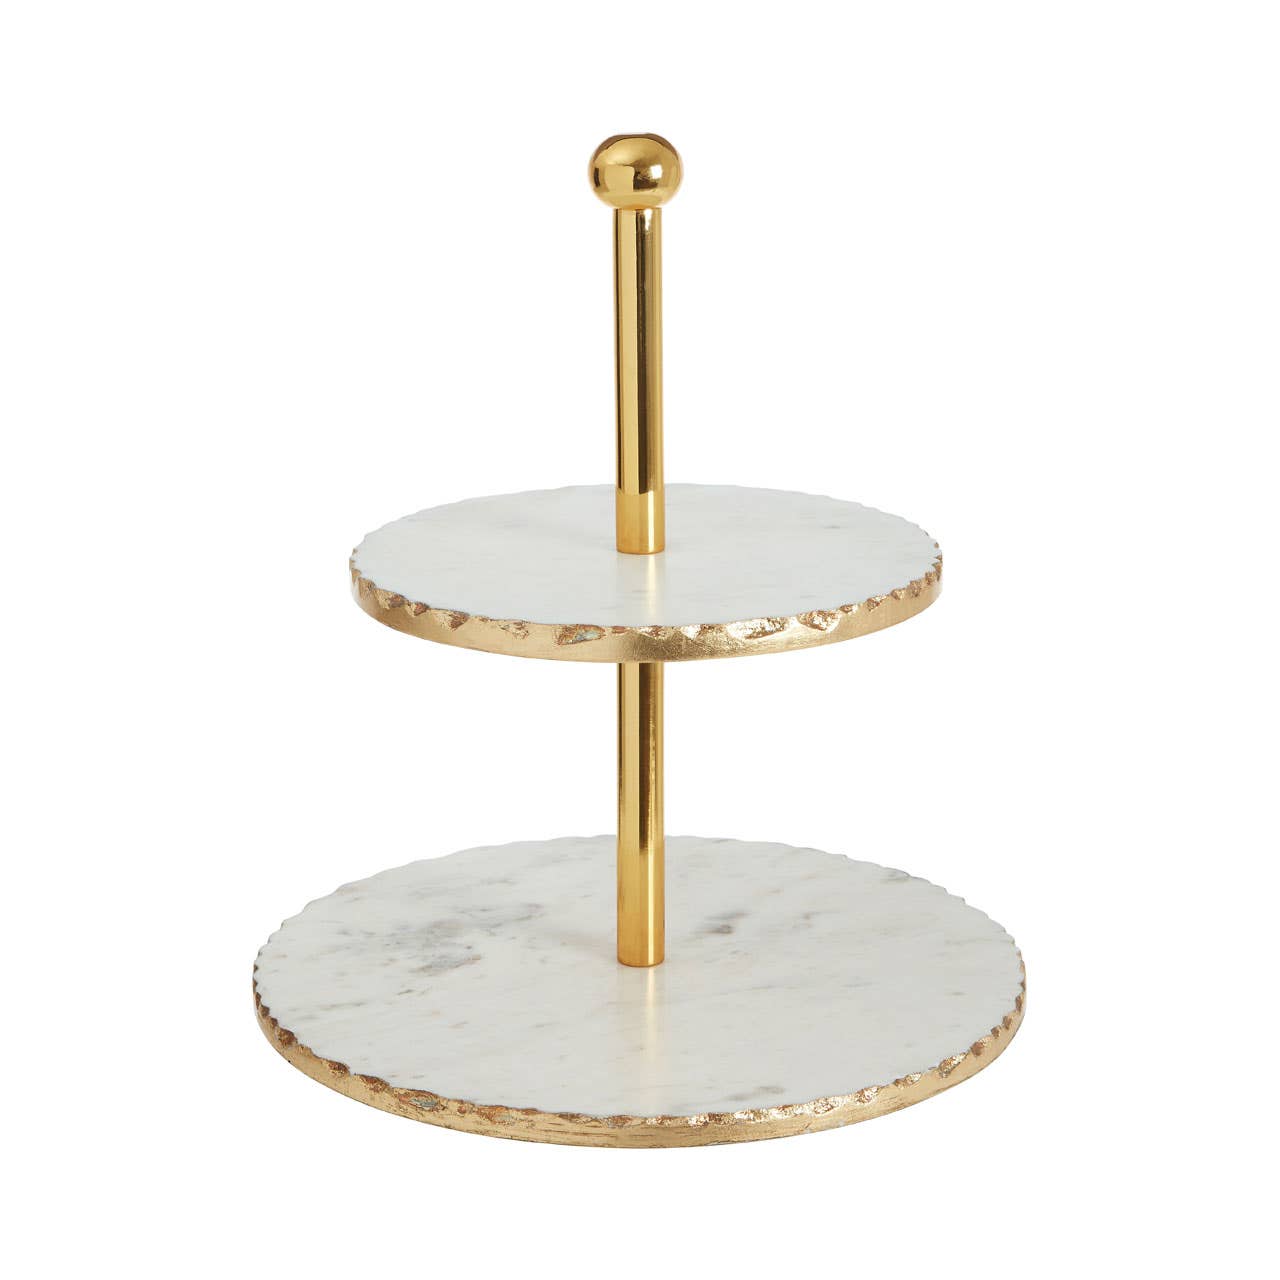 2 Tier White Marble / Gold Finish Cake Stand